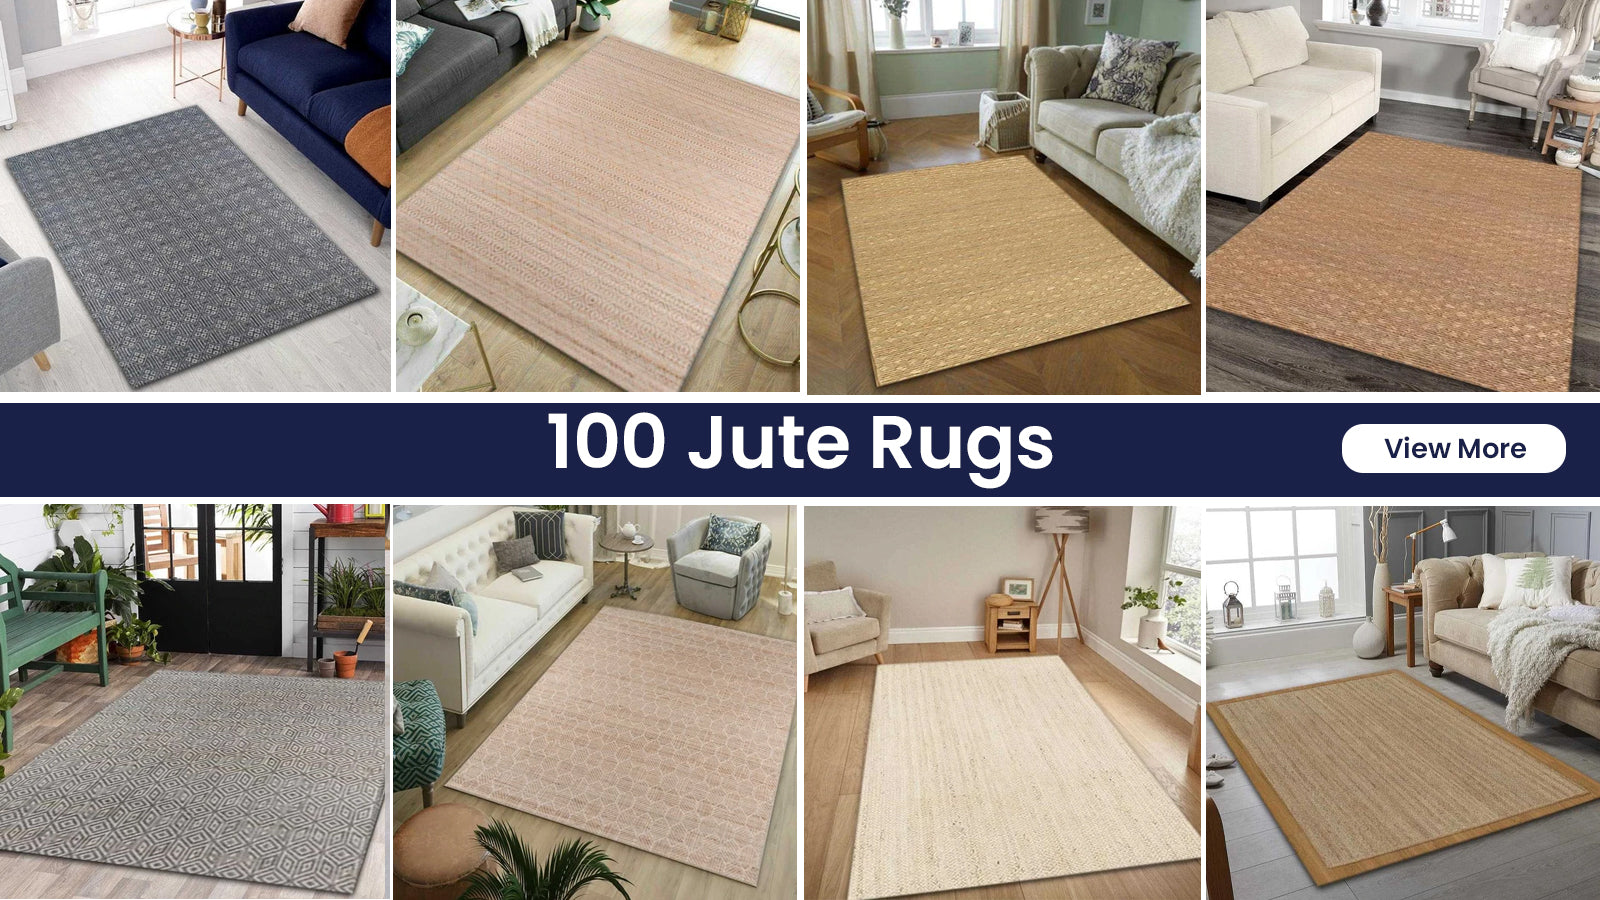 8 Ways to Decorate With Jute Rugs